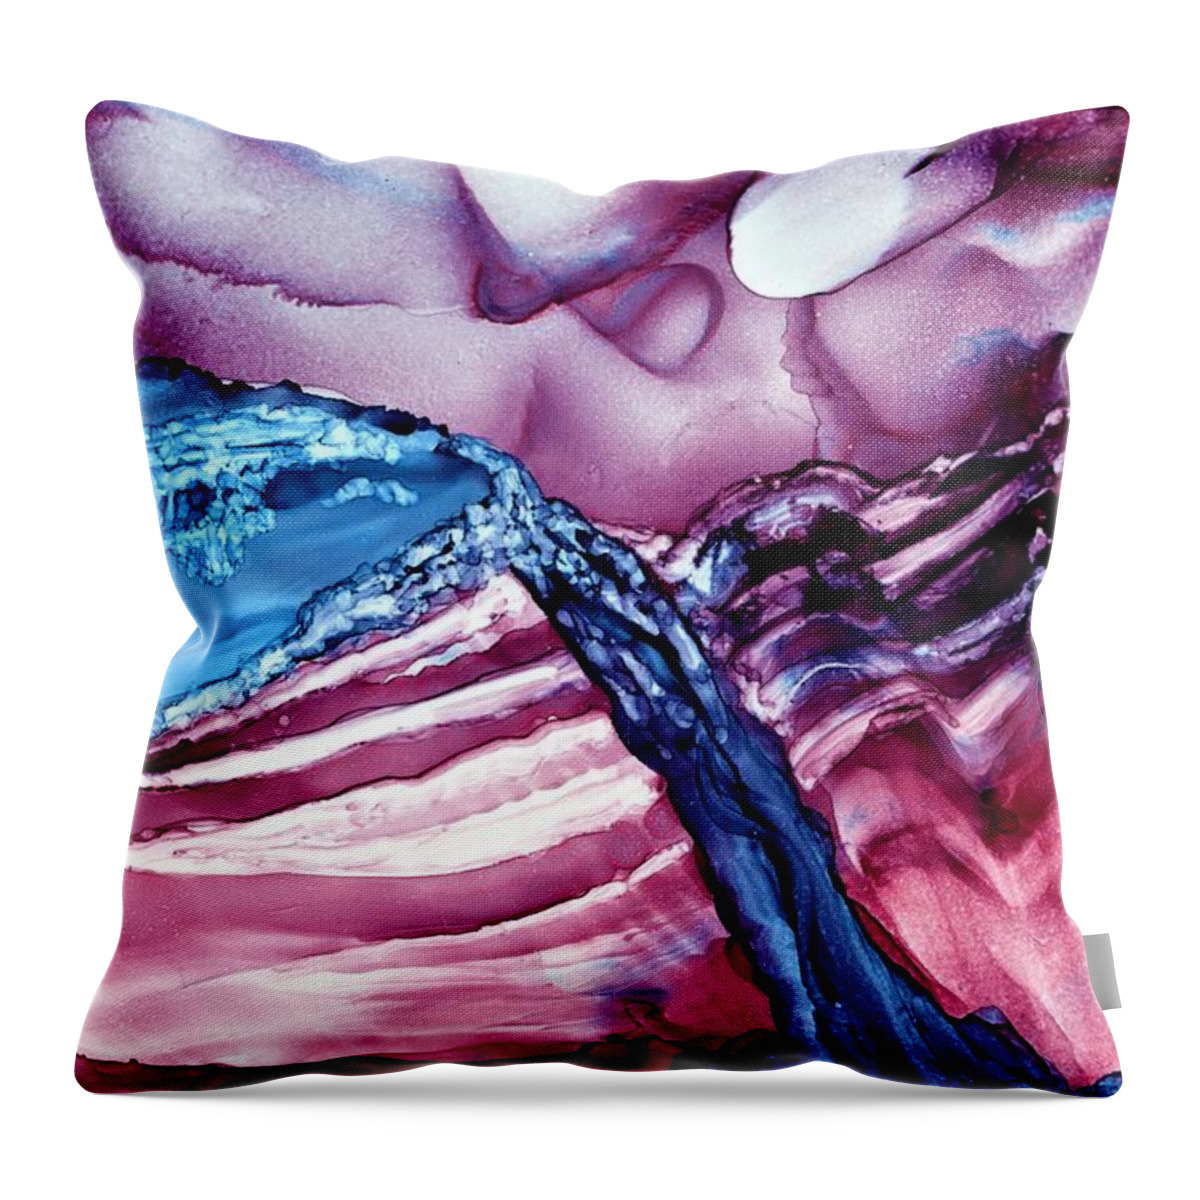 Alcohol Ink Throw Pillow featuring the painting For Purple Mountain Majesties by Angela Marinari